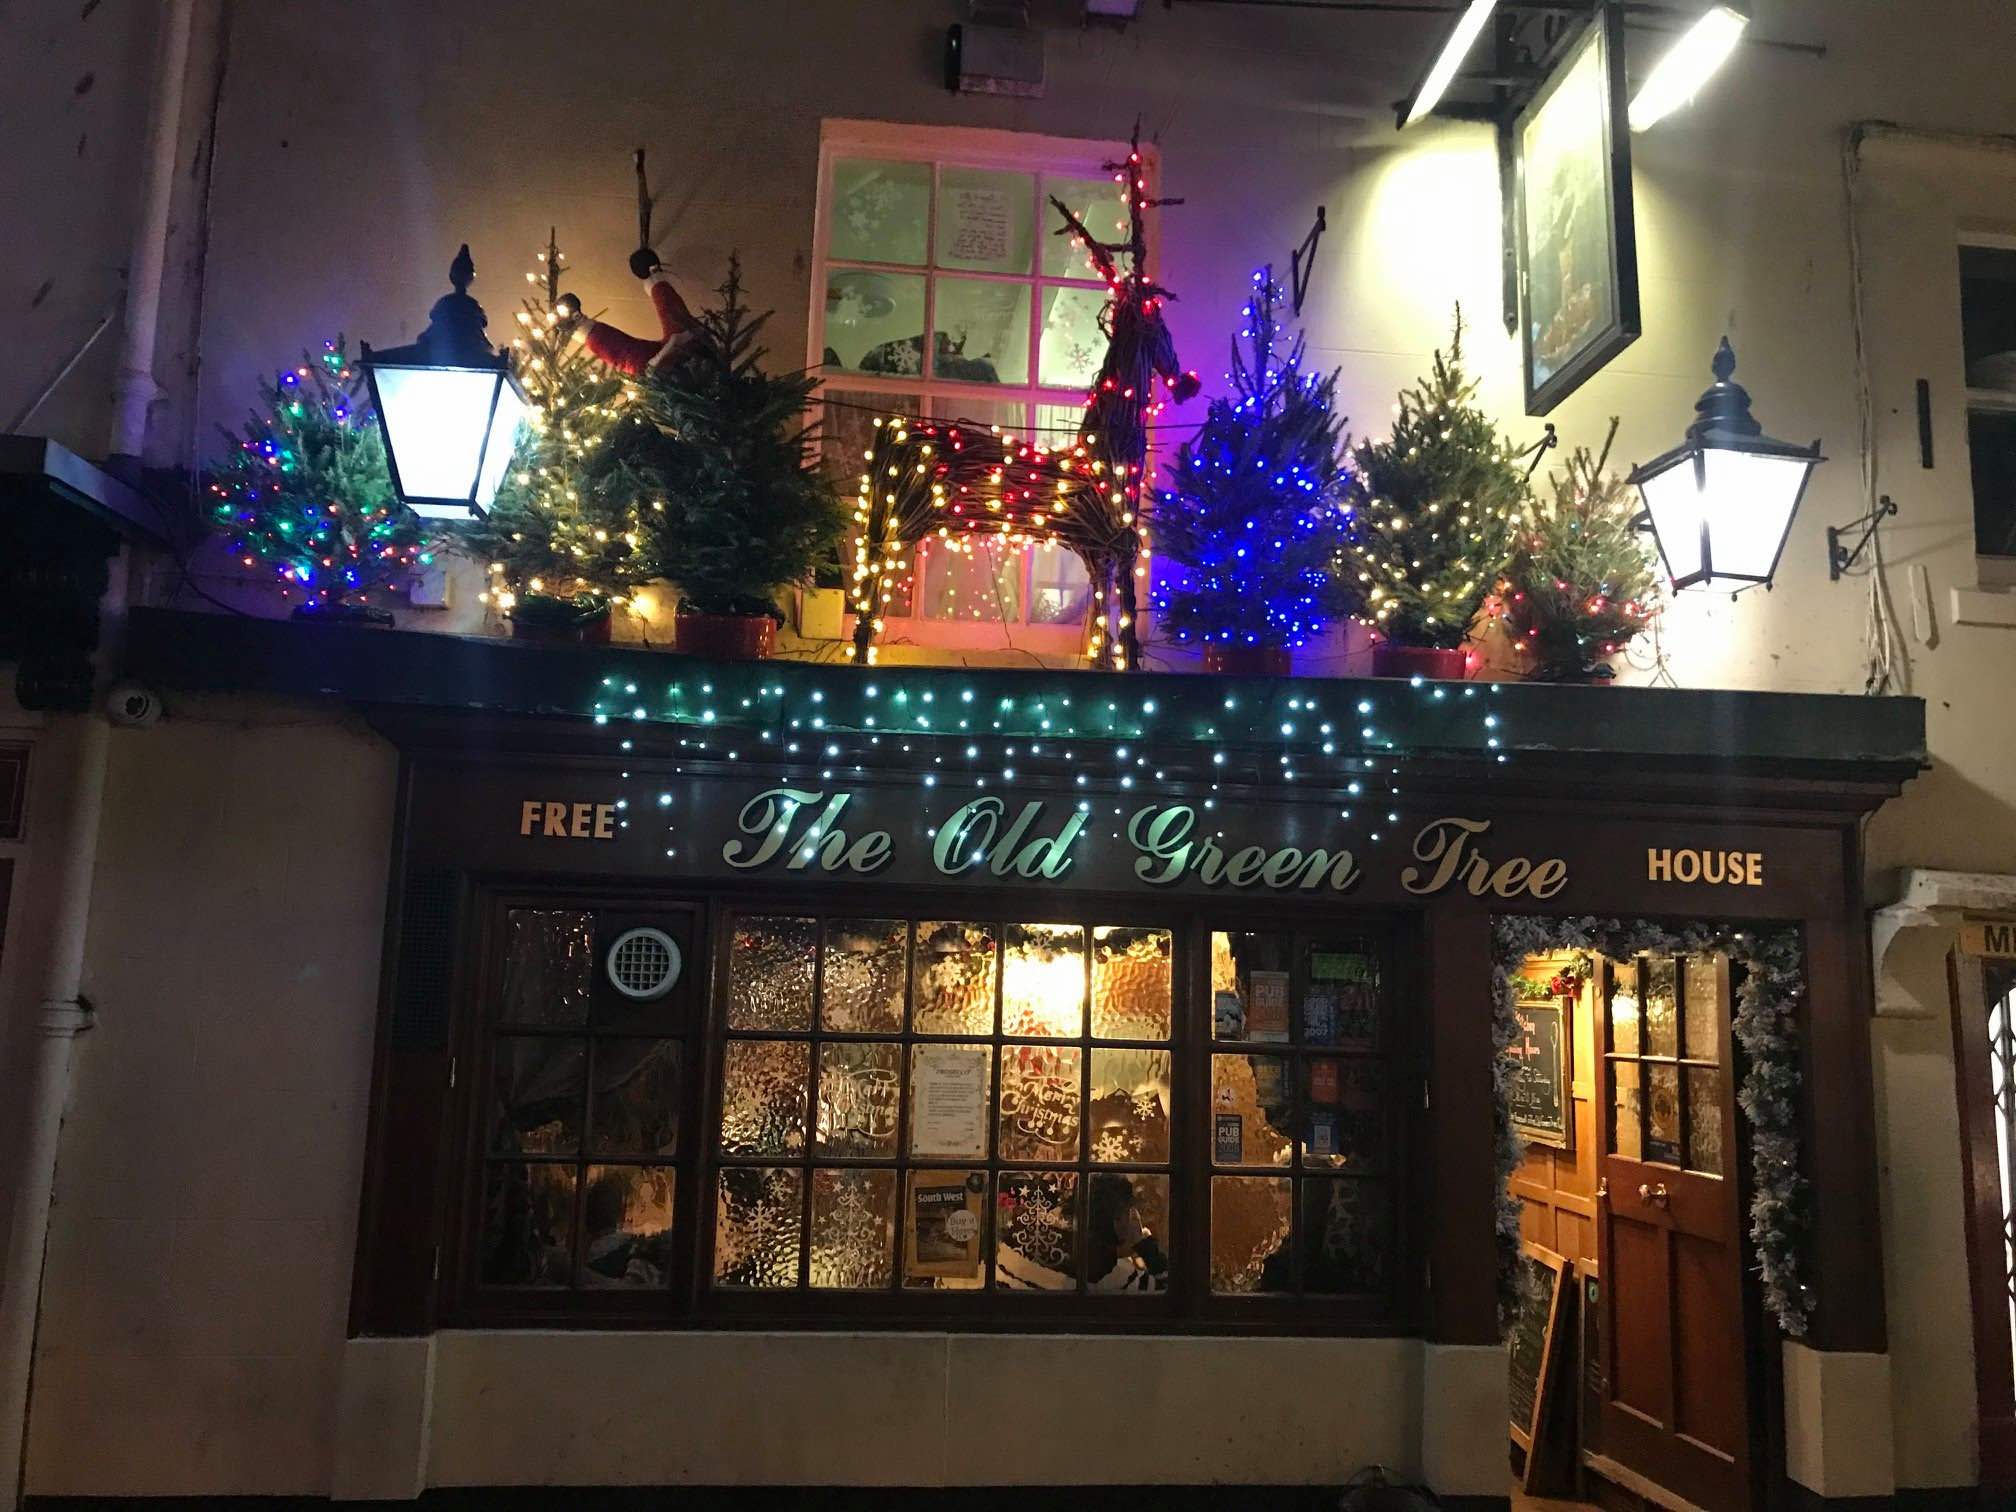 The Old Green Tree pub outside facade at night with Christmas light decorations.